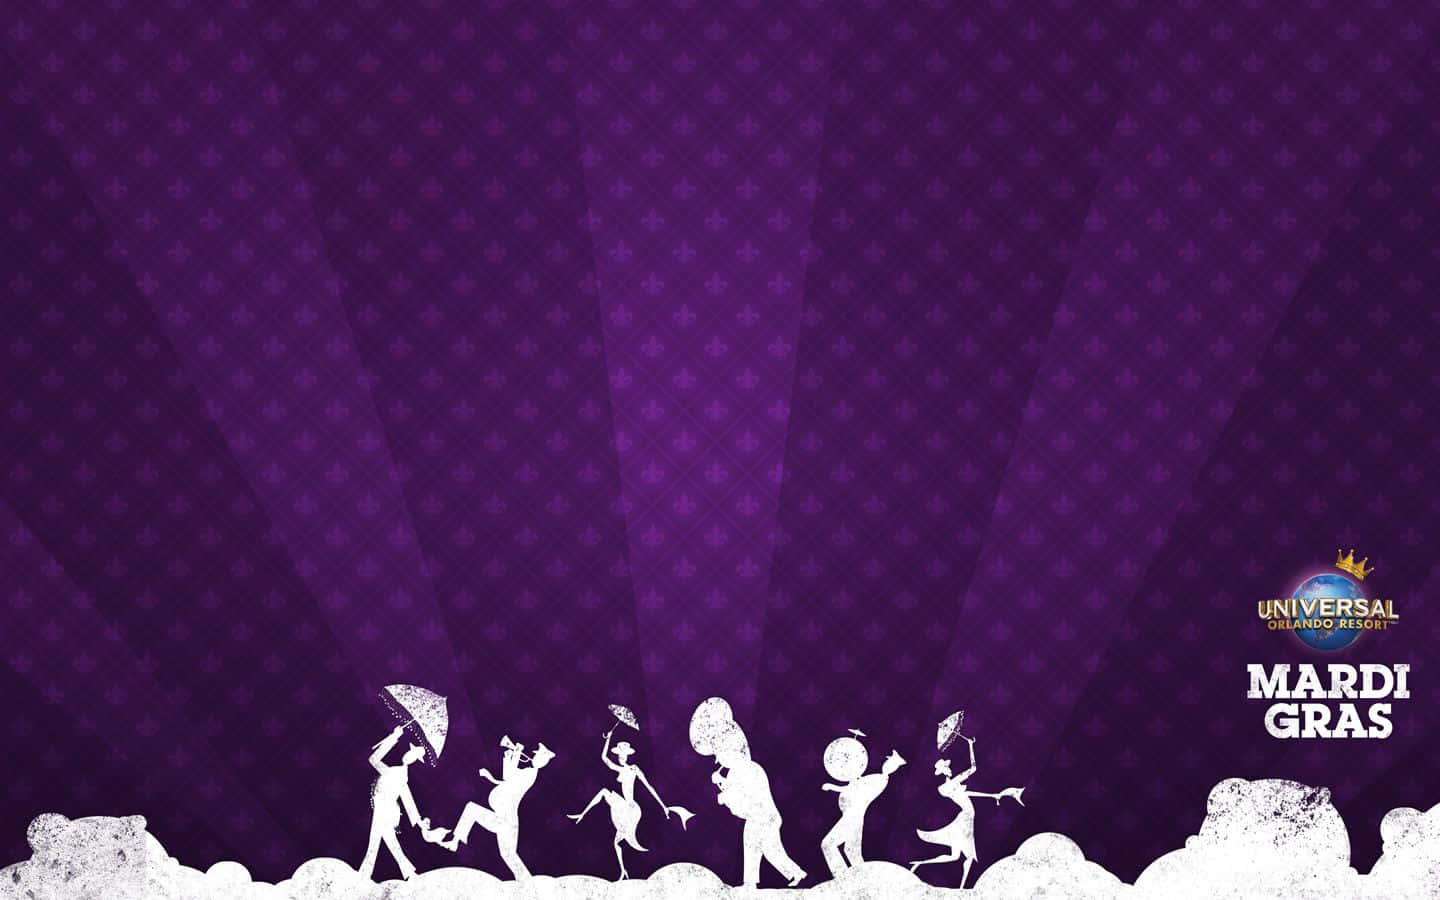 Celebrate in color and style with an unforgettable Mardi Gras! Wallpaper